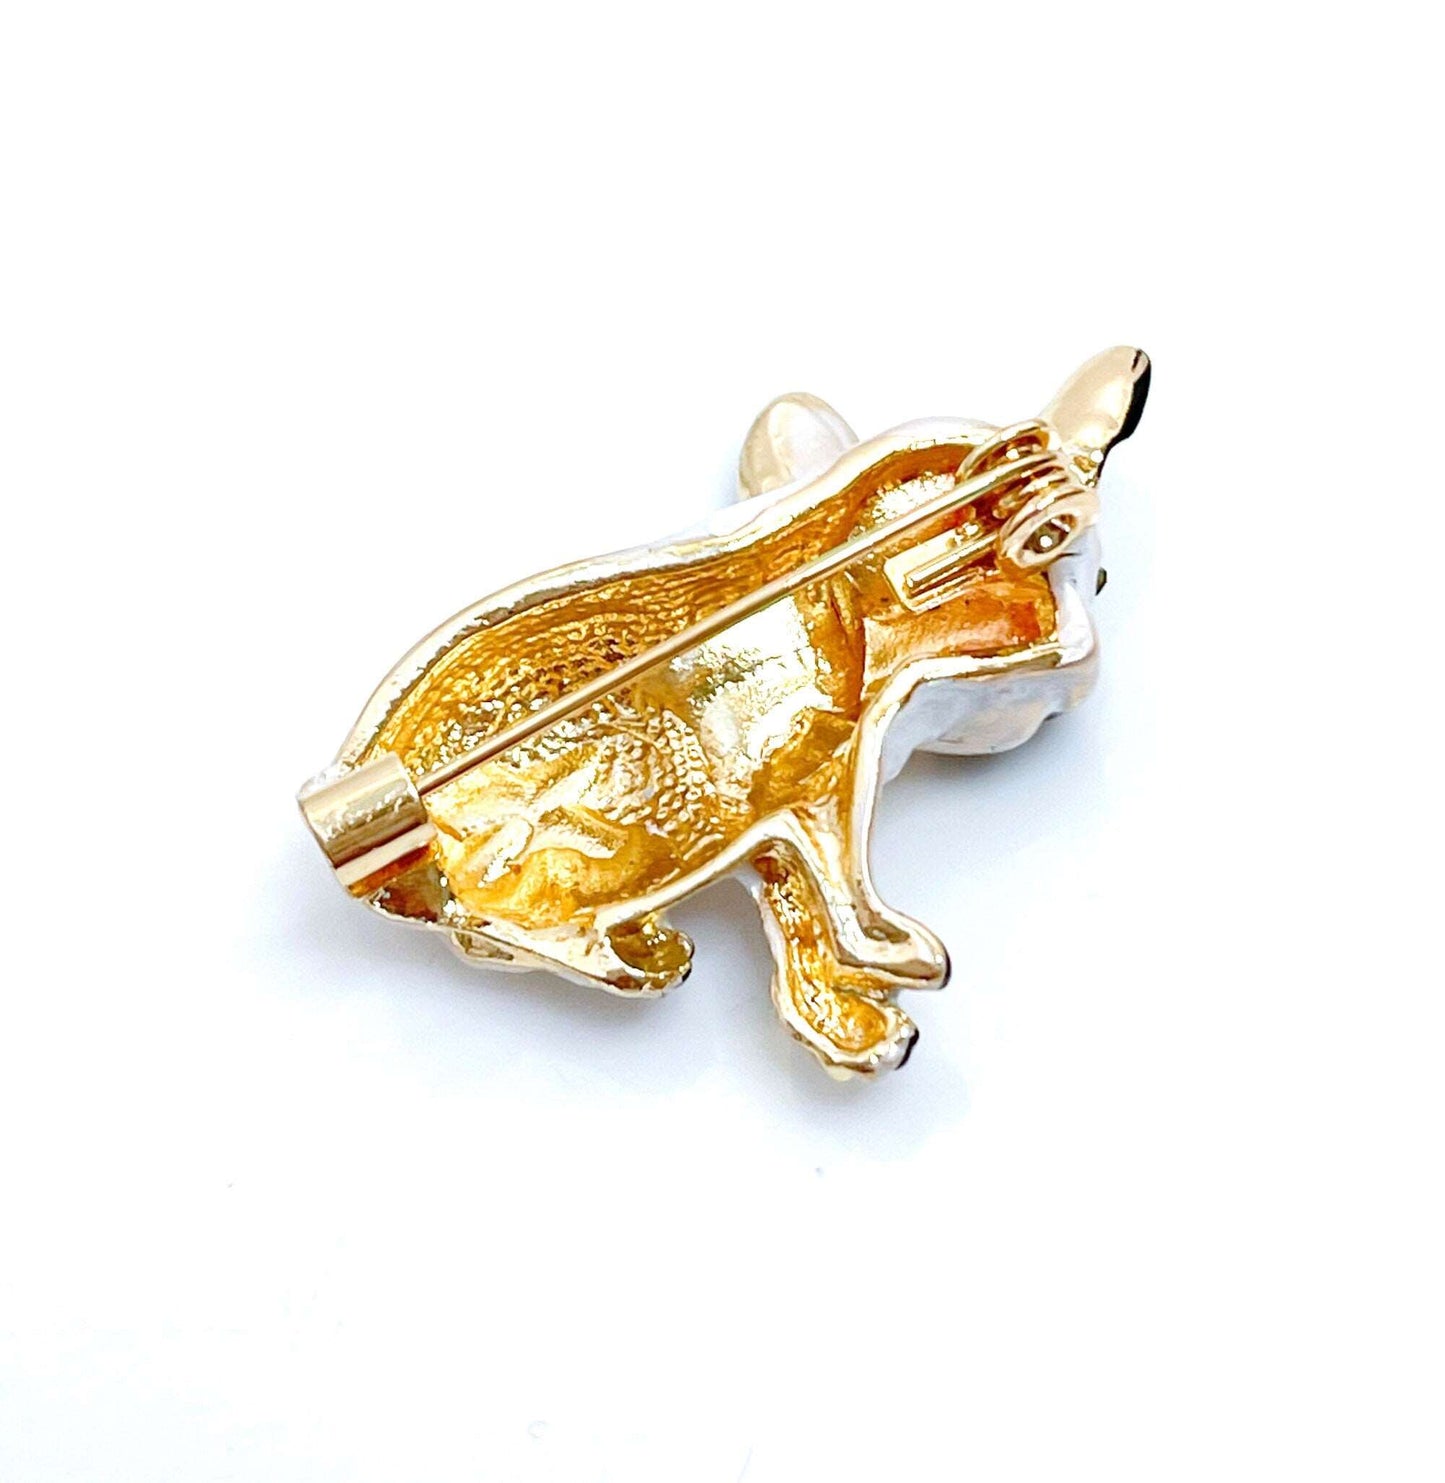 Cute Enamel Bulldog Brooch, Gift for Dog Lovers, Dog Jewelry, Cute White Gold Pooch Pin, Stylish Jacket Pin, Brooches For Women